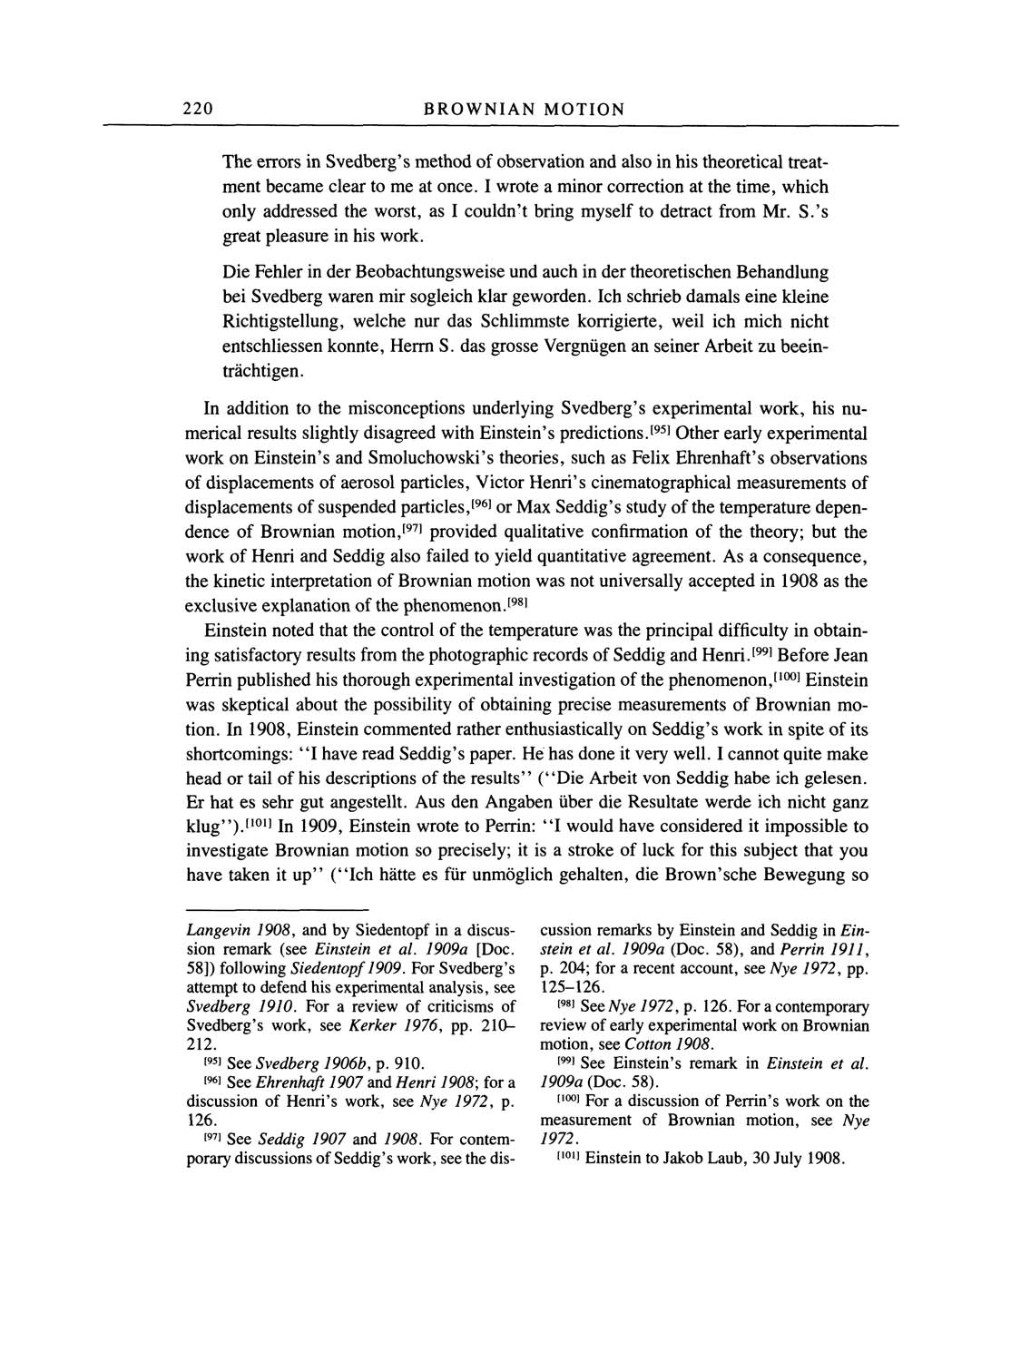 Volume 2: The Swiss Years: Writings, 1900-1909 page 220